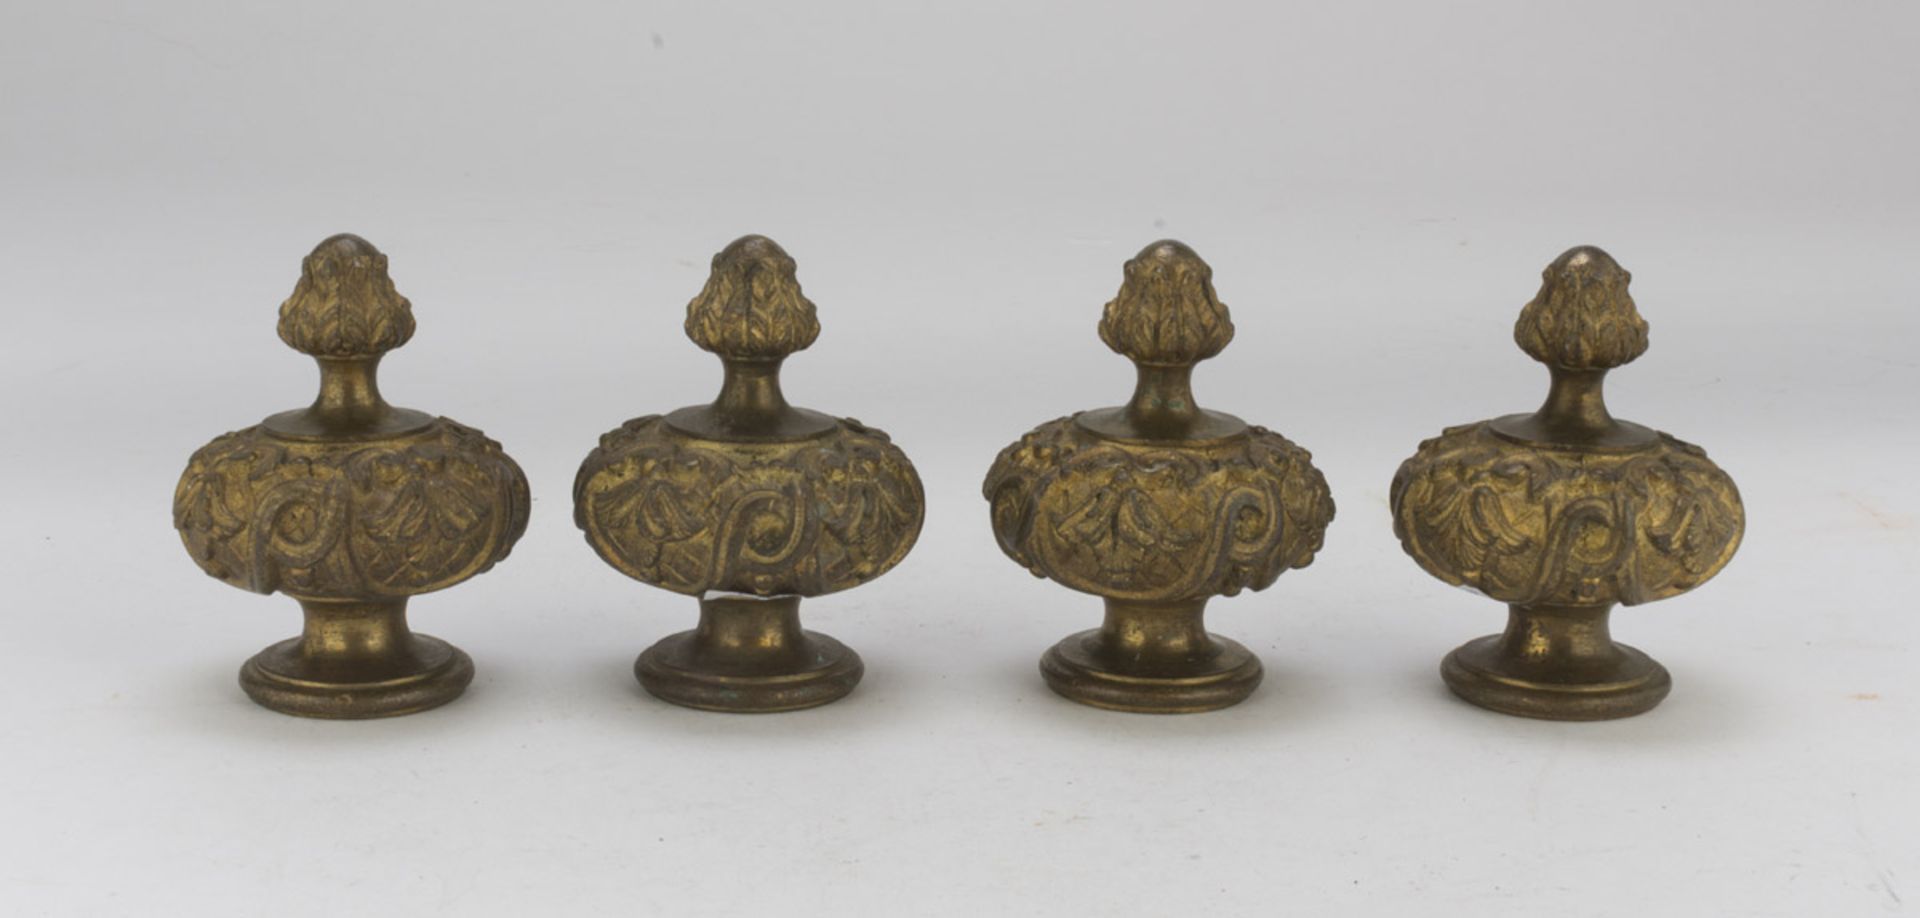 FOUR KNOBS IN ORMOLU, 18TH CENTURY called 'boules des escalier', chiseled to leaves and spiral.